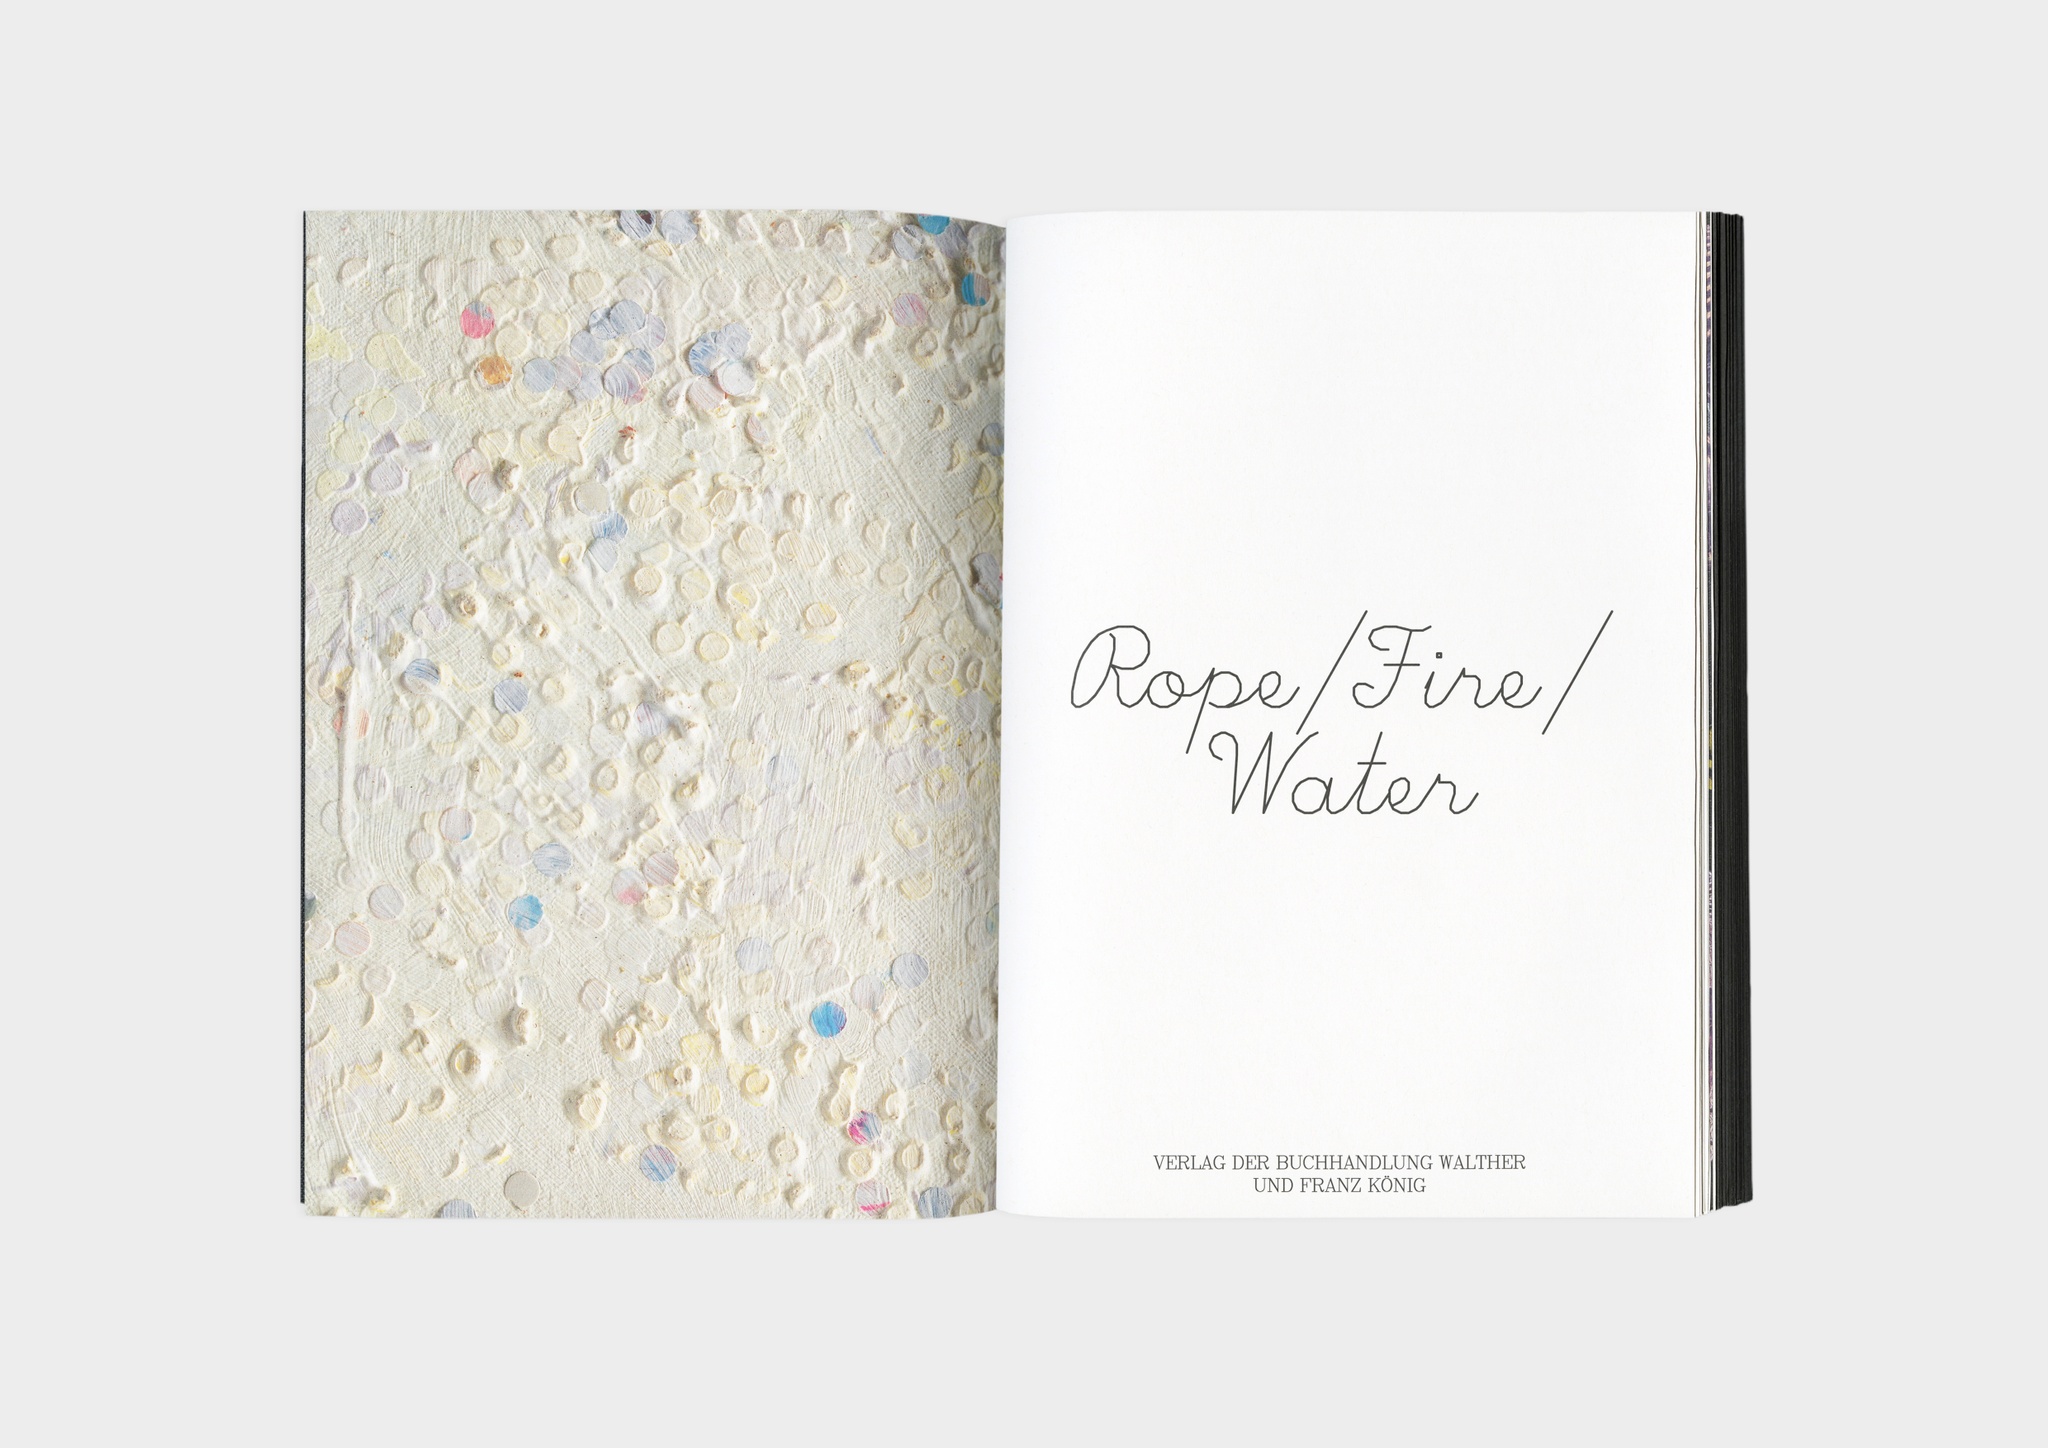 The title page spread of the catalogue "Howardena Pindell: Rope/Fire/Water". On the left is a full-bleed detail image of a white abstract painting with multicolored dots. On the left is the book's title and publisher name.